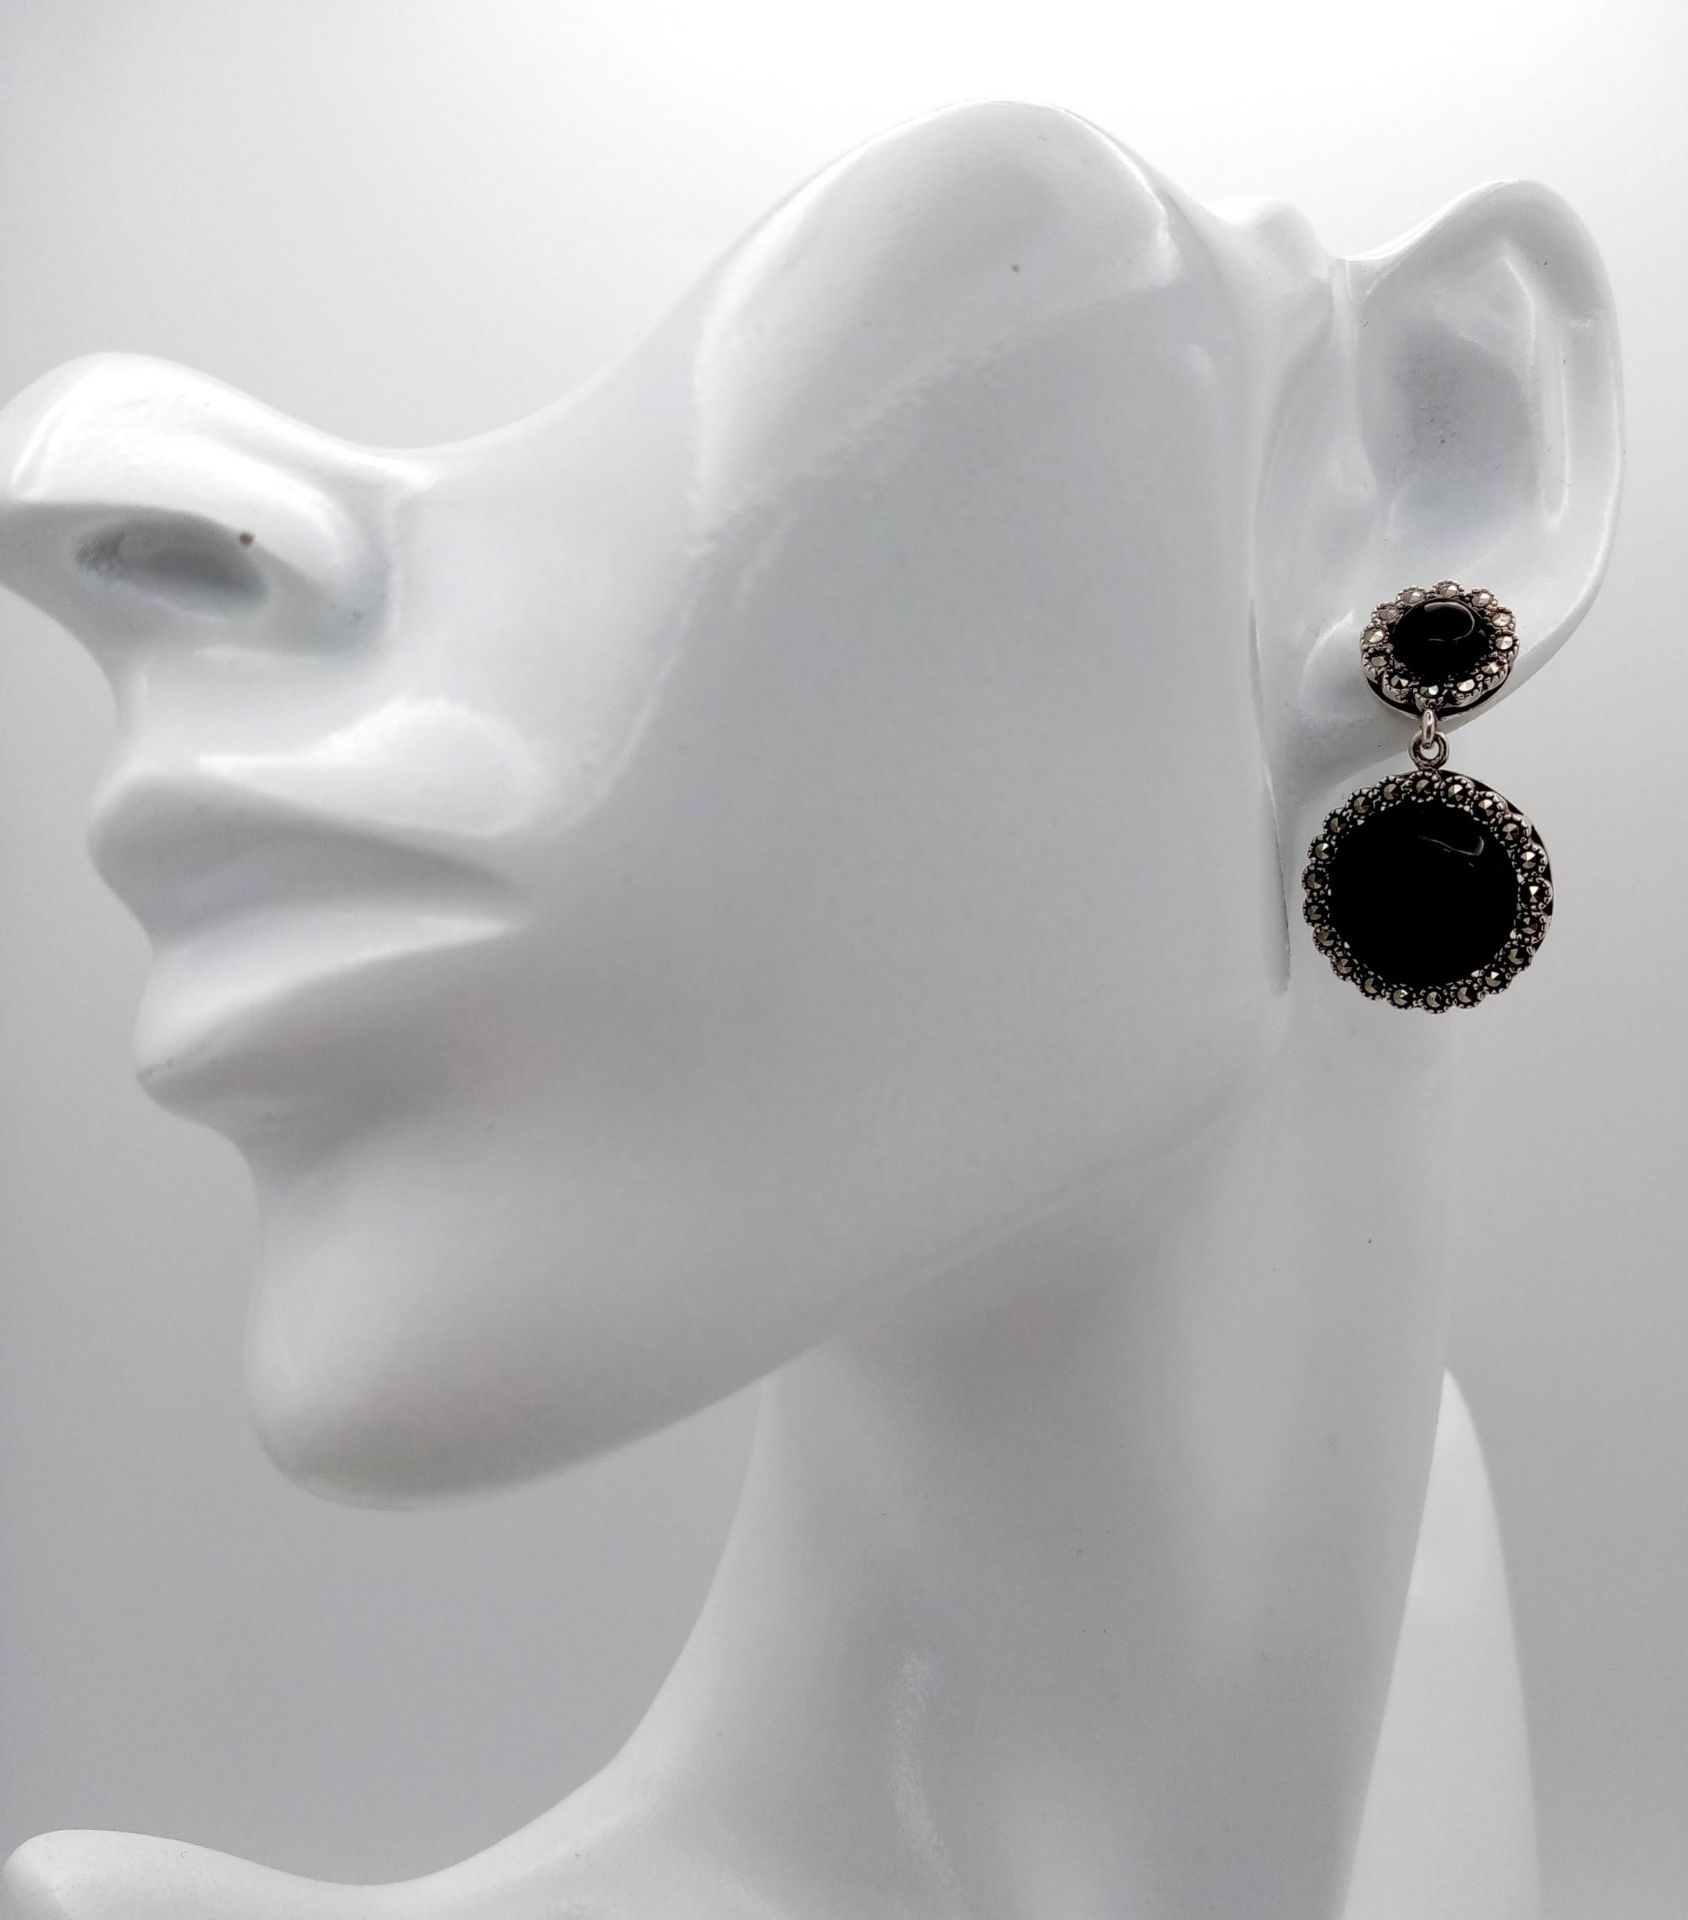 A Pair of 925 Silver, Black Onyx and Marcasite Drop Earrings. 3cm drop. Comes with a presentation - Bild 4 aus 6